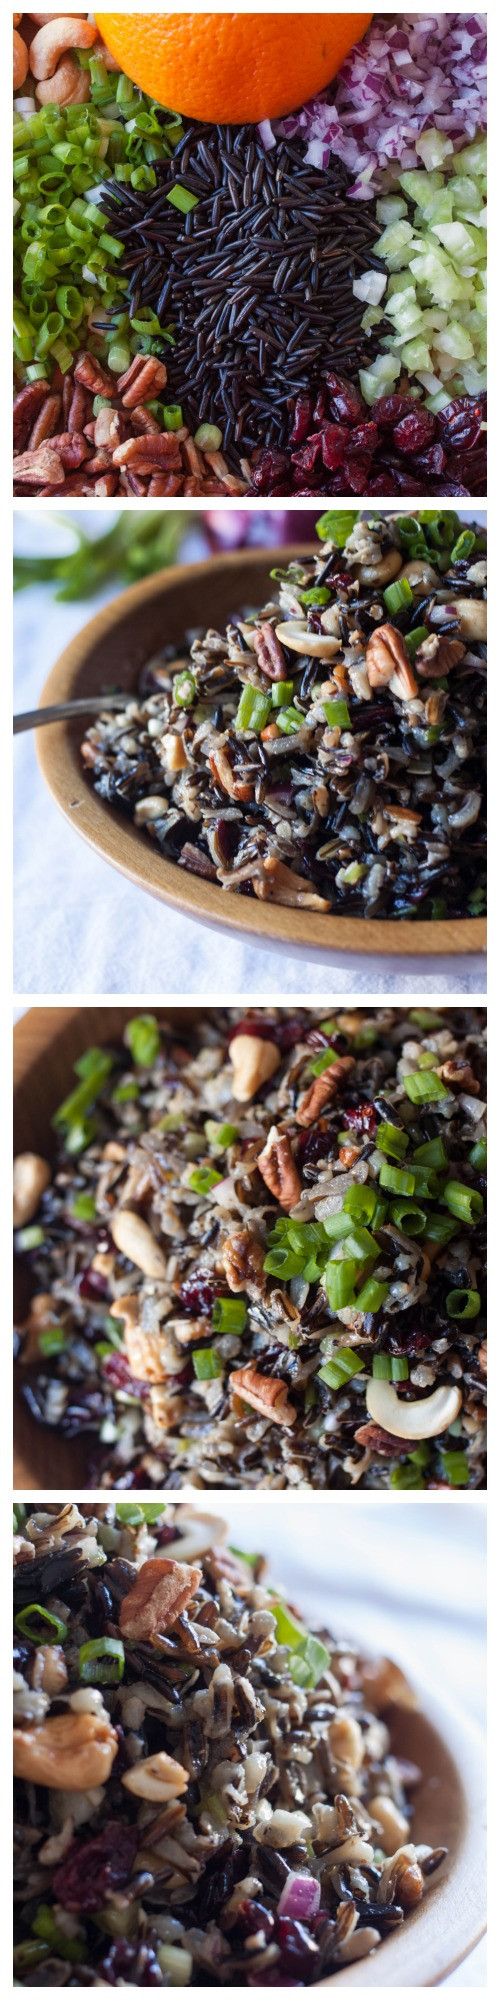 Cold Salads For Thanksgiving
 Cold Rice Salad for Fall Made From Pinterest